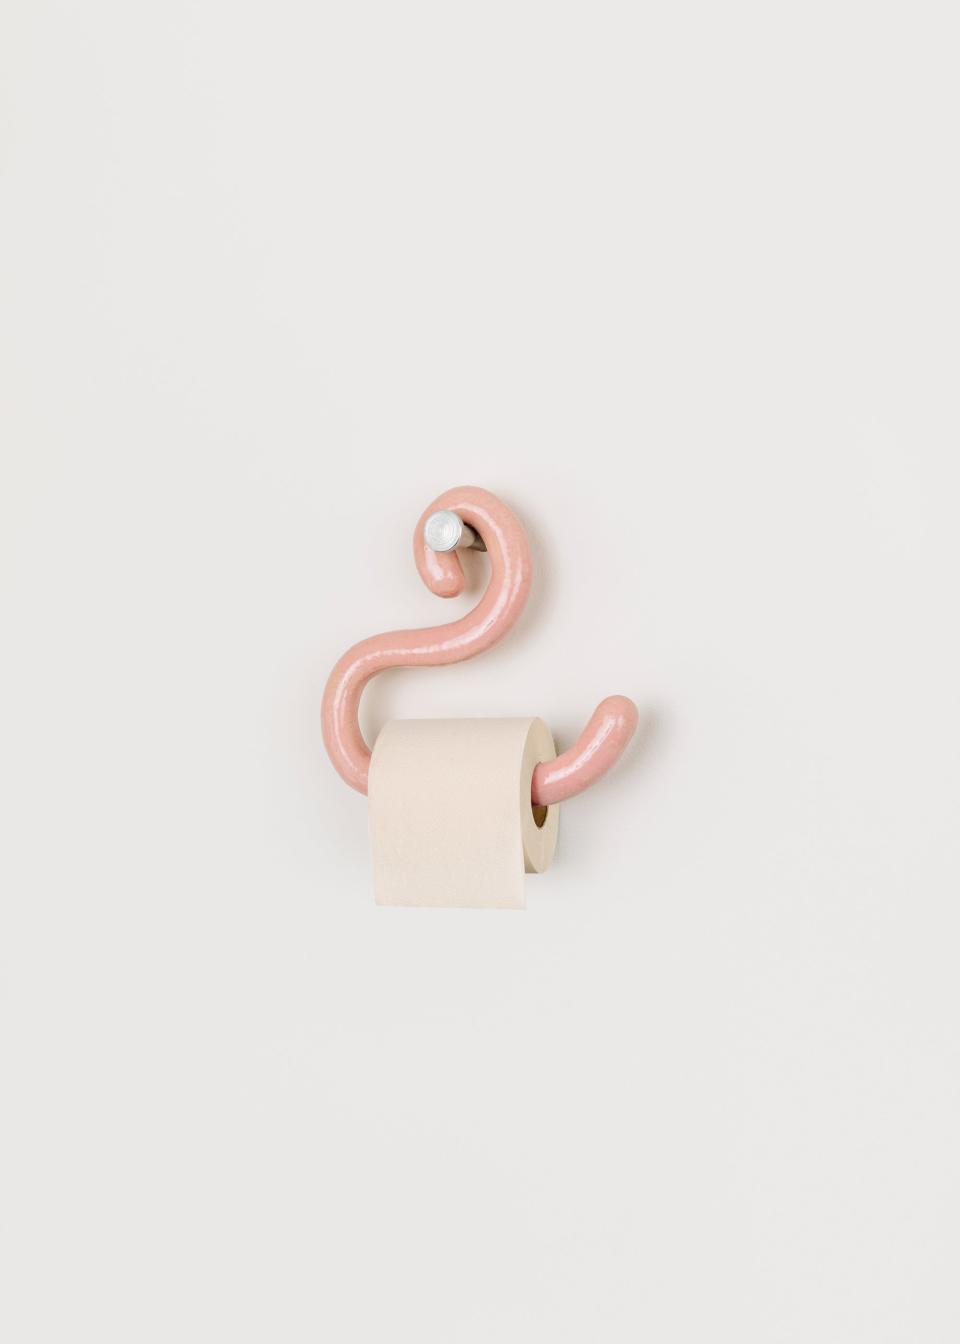 There are a variety of colorful ceramic holders on display by BNAG. This one is called Toilet Flamingo.